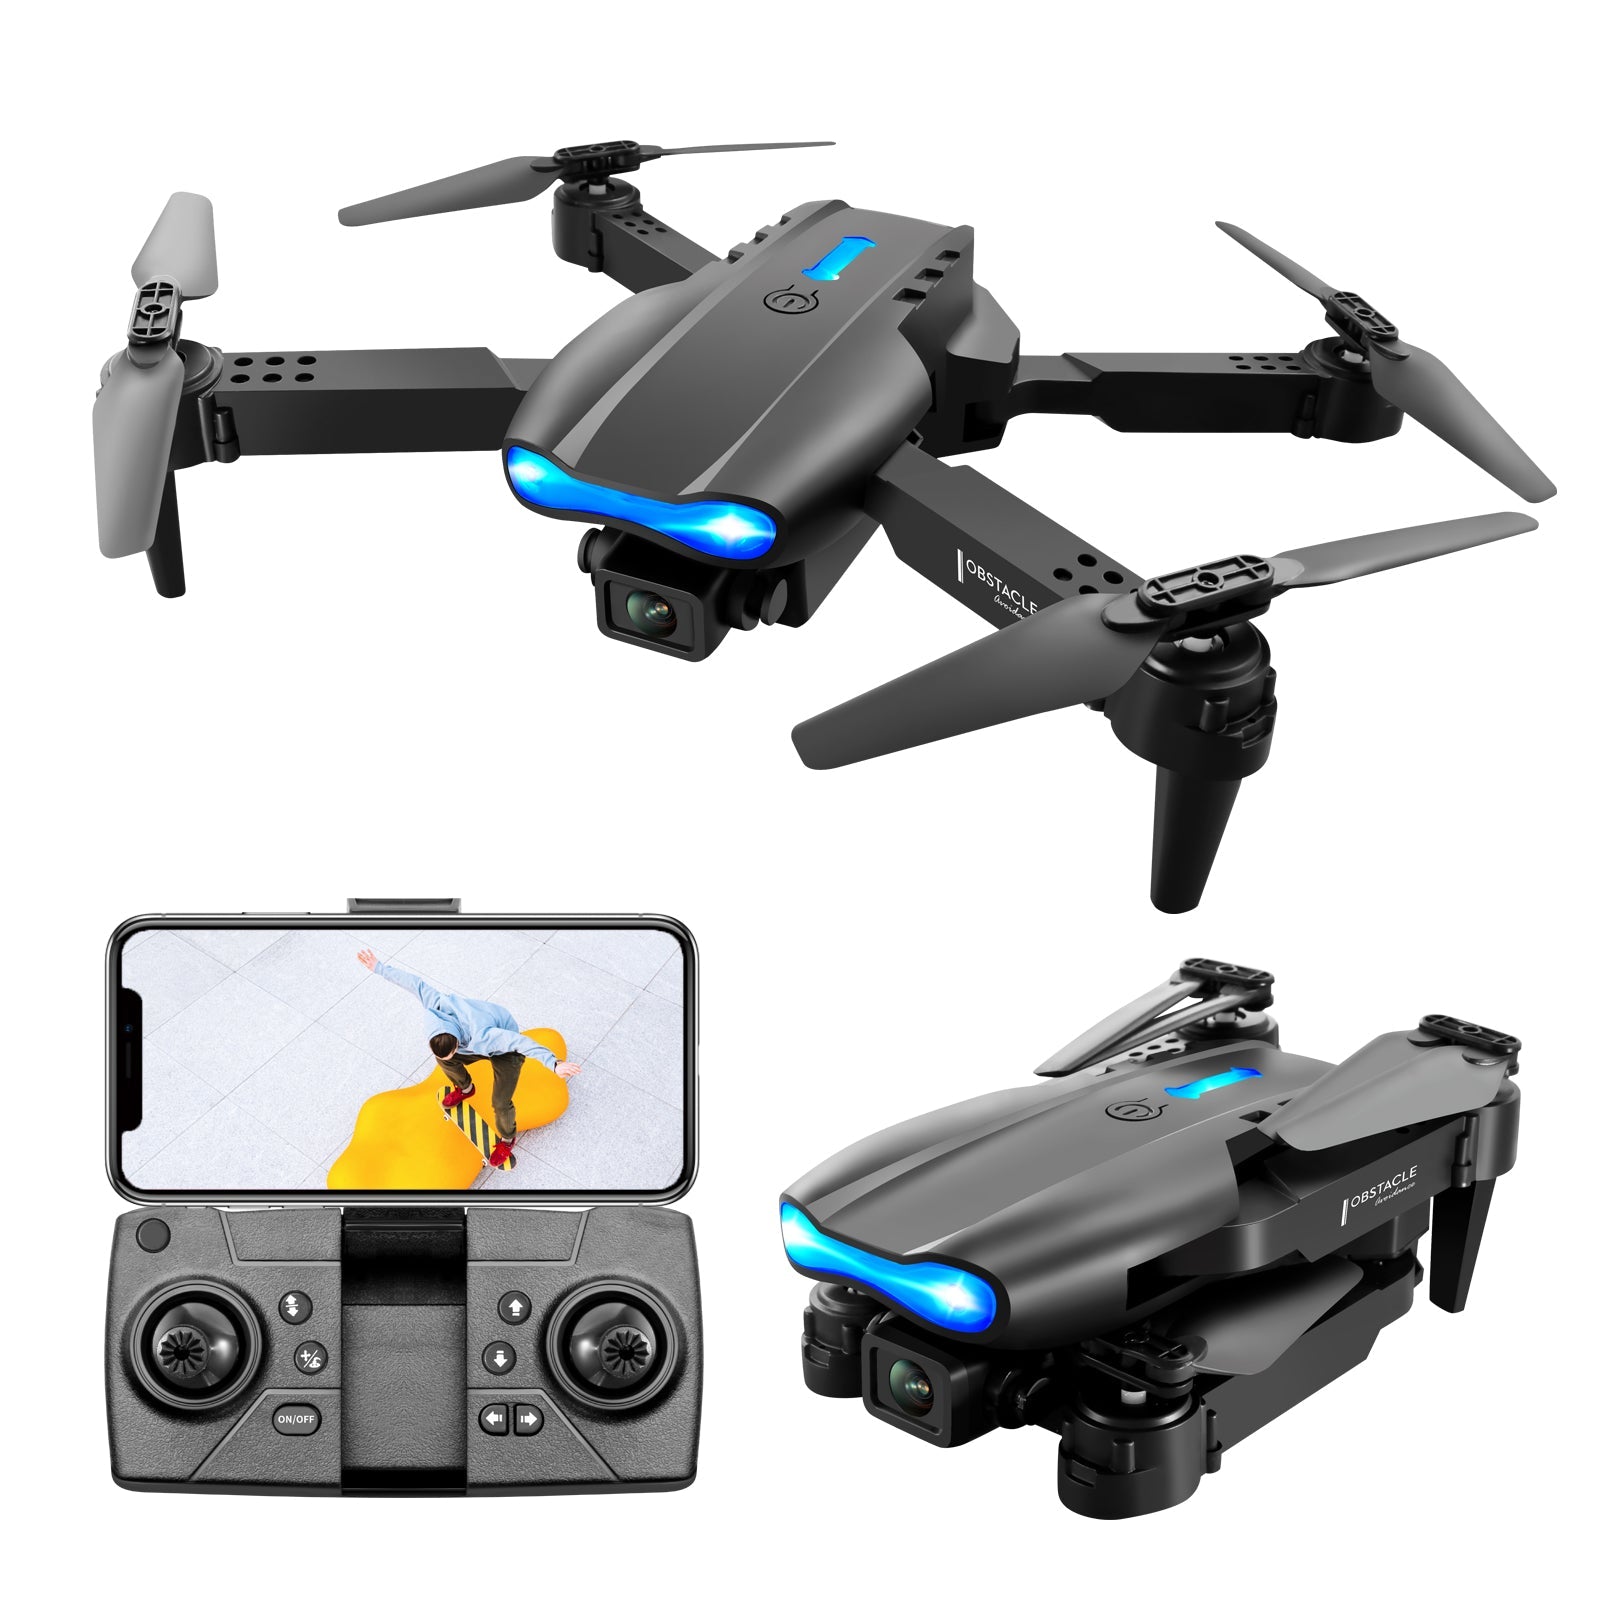 E99 K3 remote control professional drones 4k brushless motor drone video dual camera | Electrr Inc